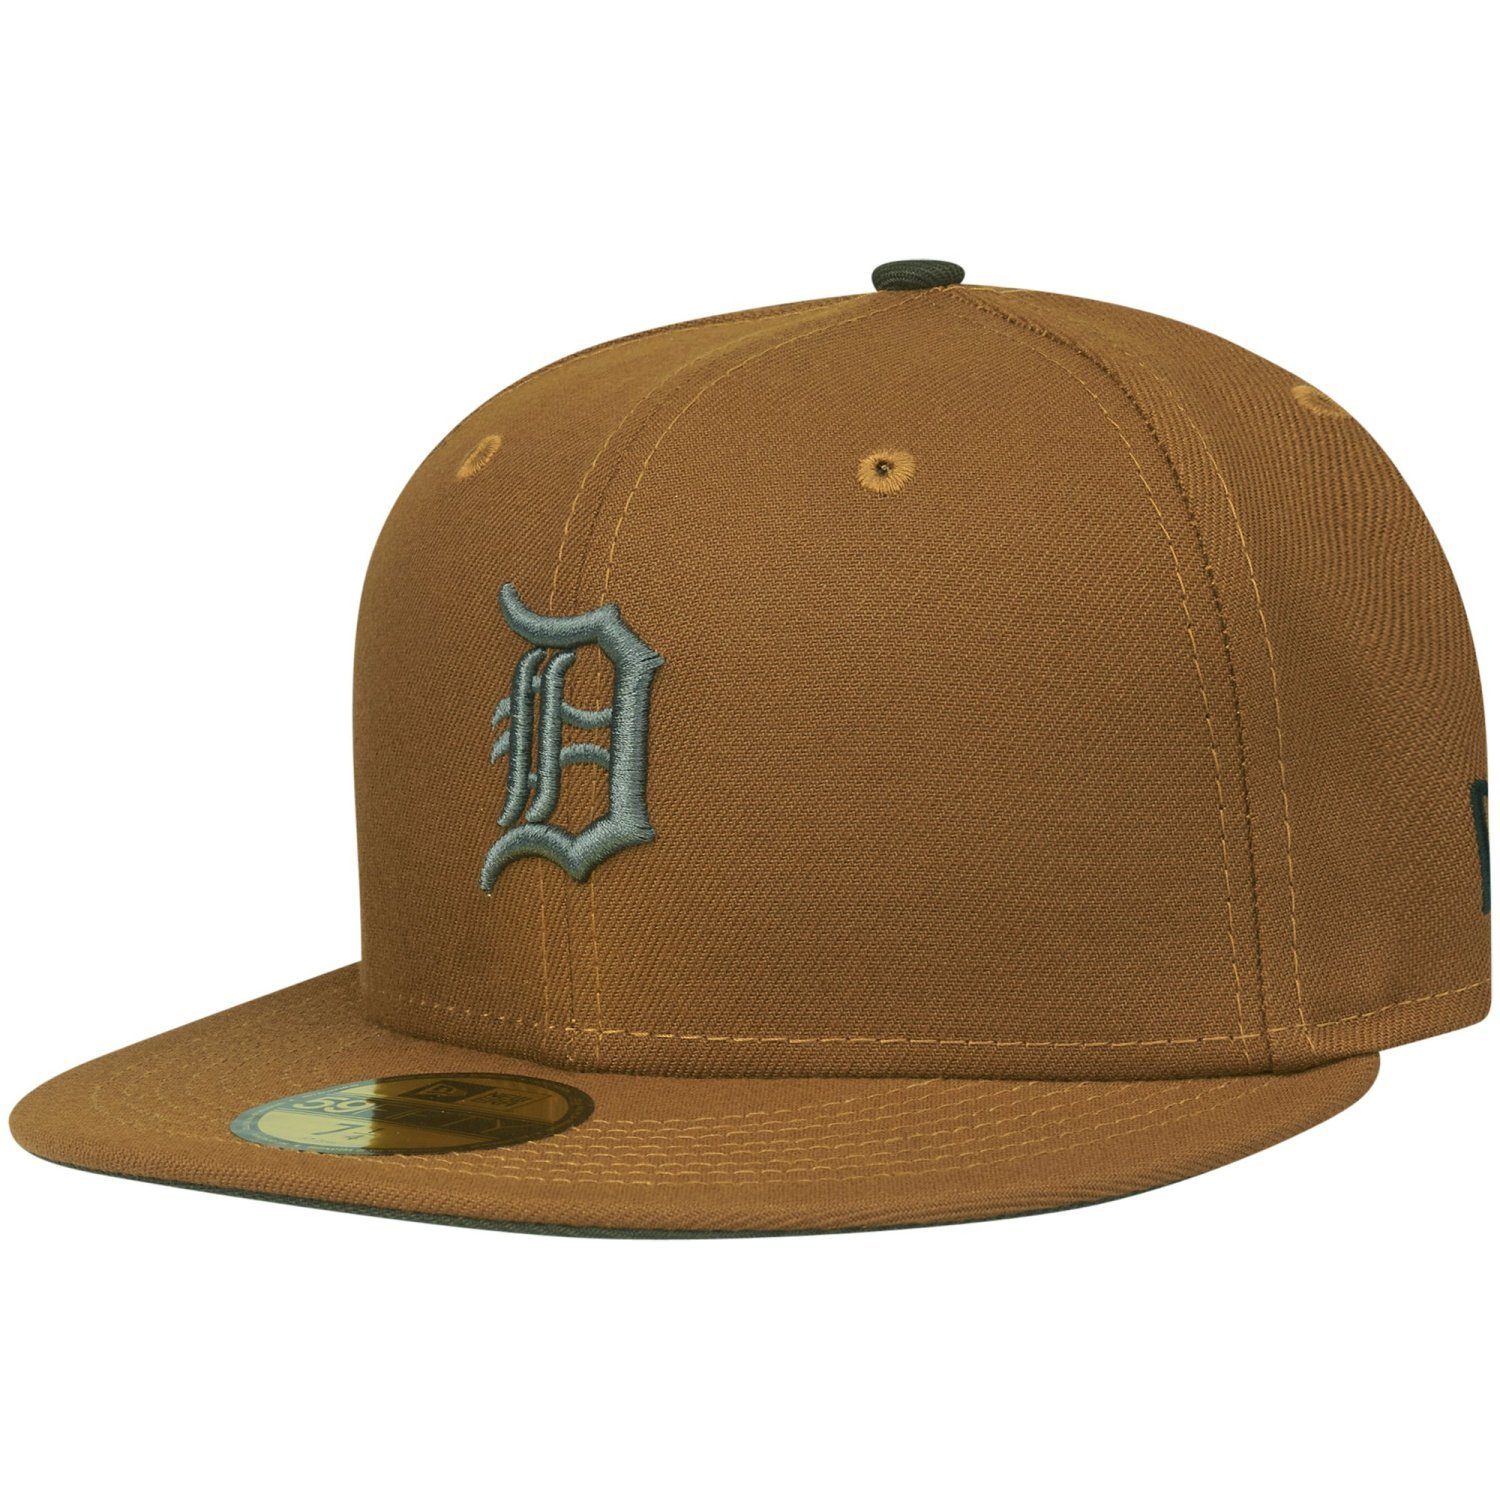 Detroit Cap Fitted SERIES WORLD Tigers 59Fifty New Era 1984